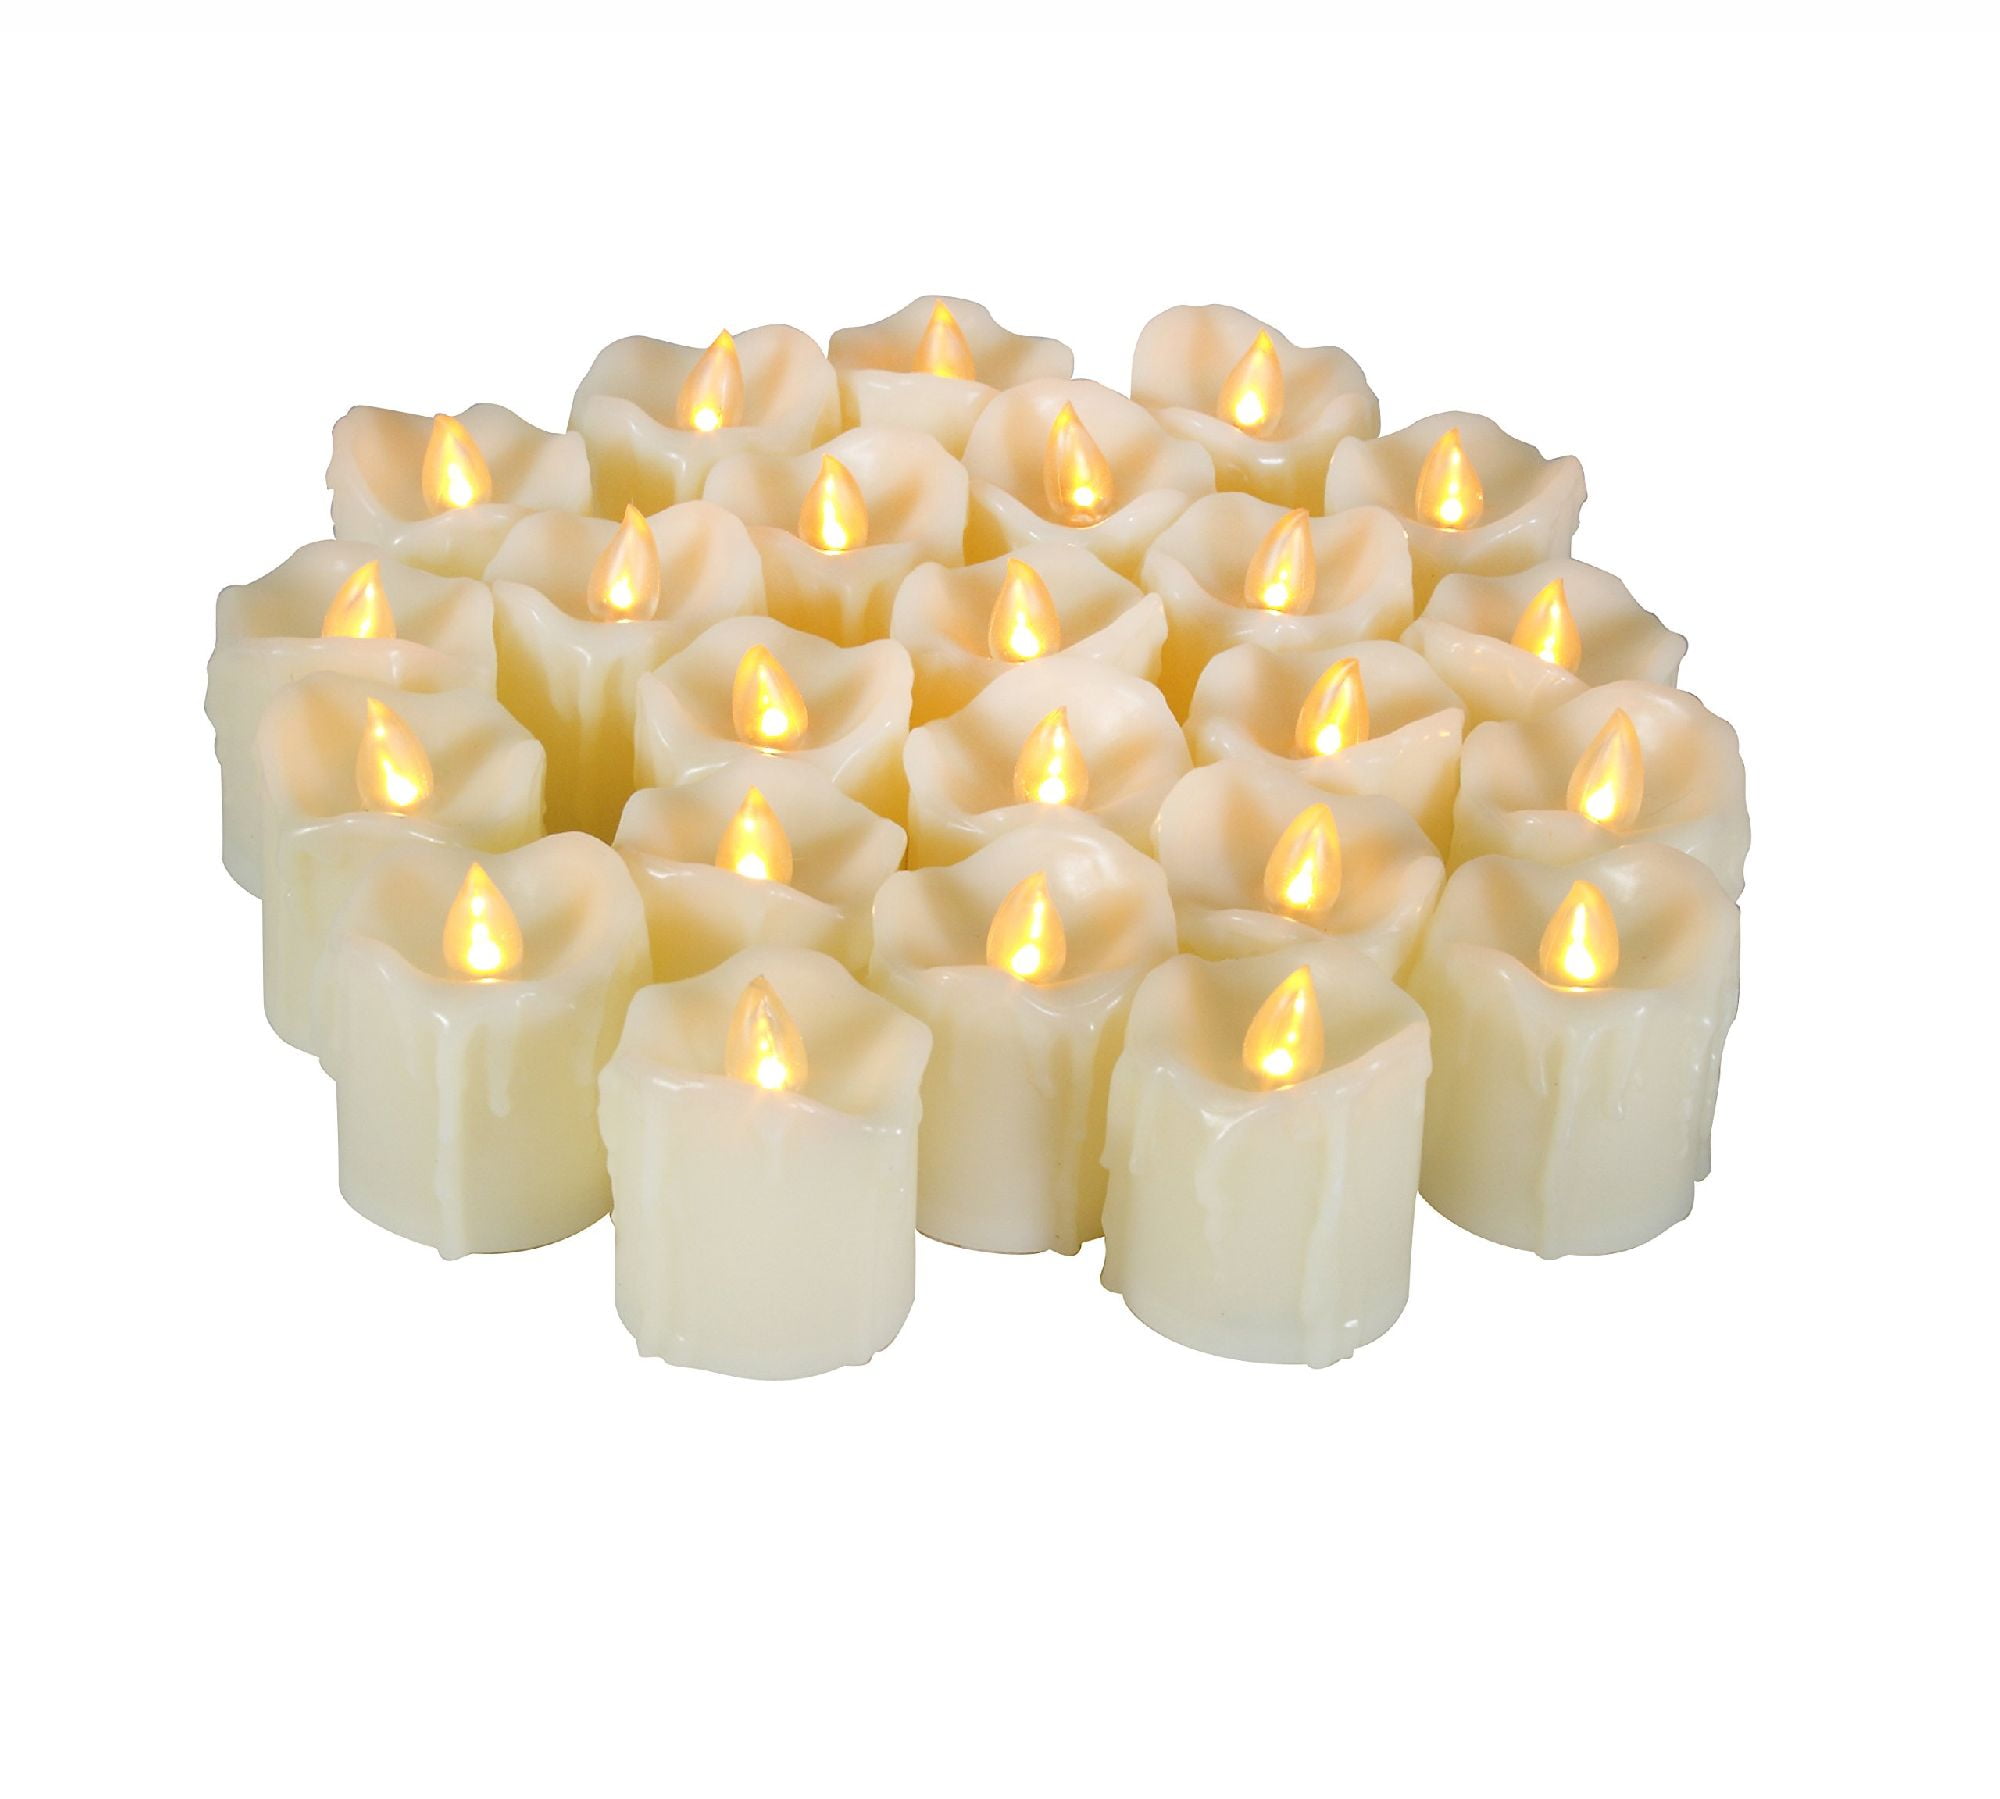 6PCS Flameless Battery Operated LED Votive Candles with Remote Drips 1.5”x2” 